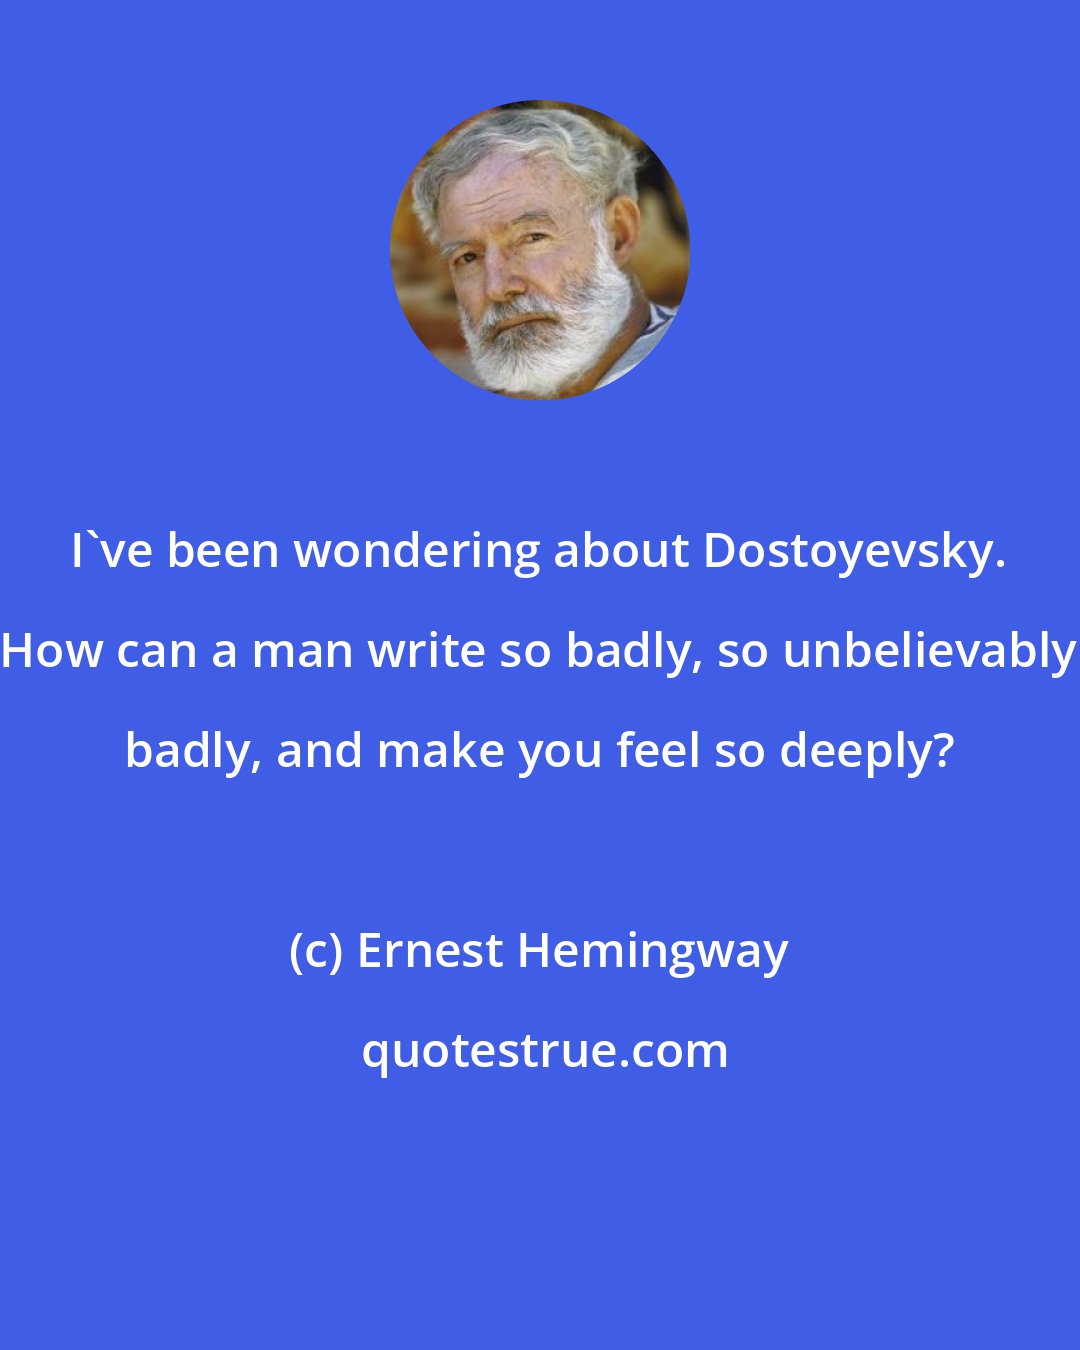 Ernest Hemingway: I've been wondering about Dostoyevsky. How can a man write so badly, so unbelievably badly, and make you feel so deeply?